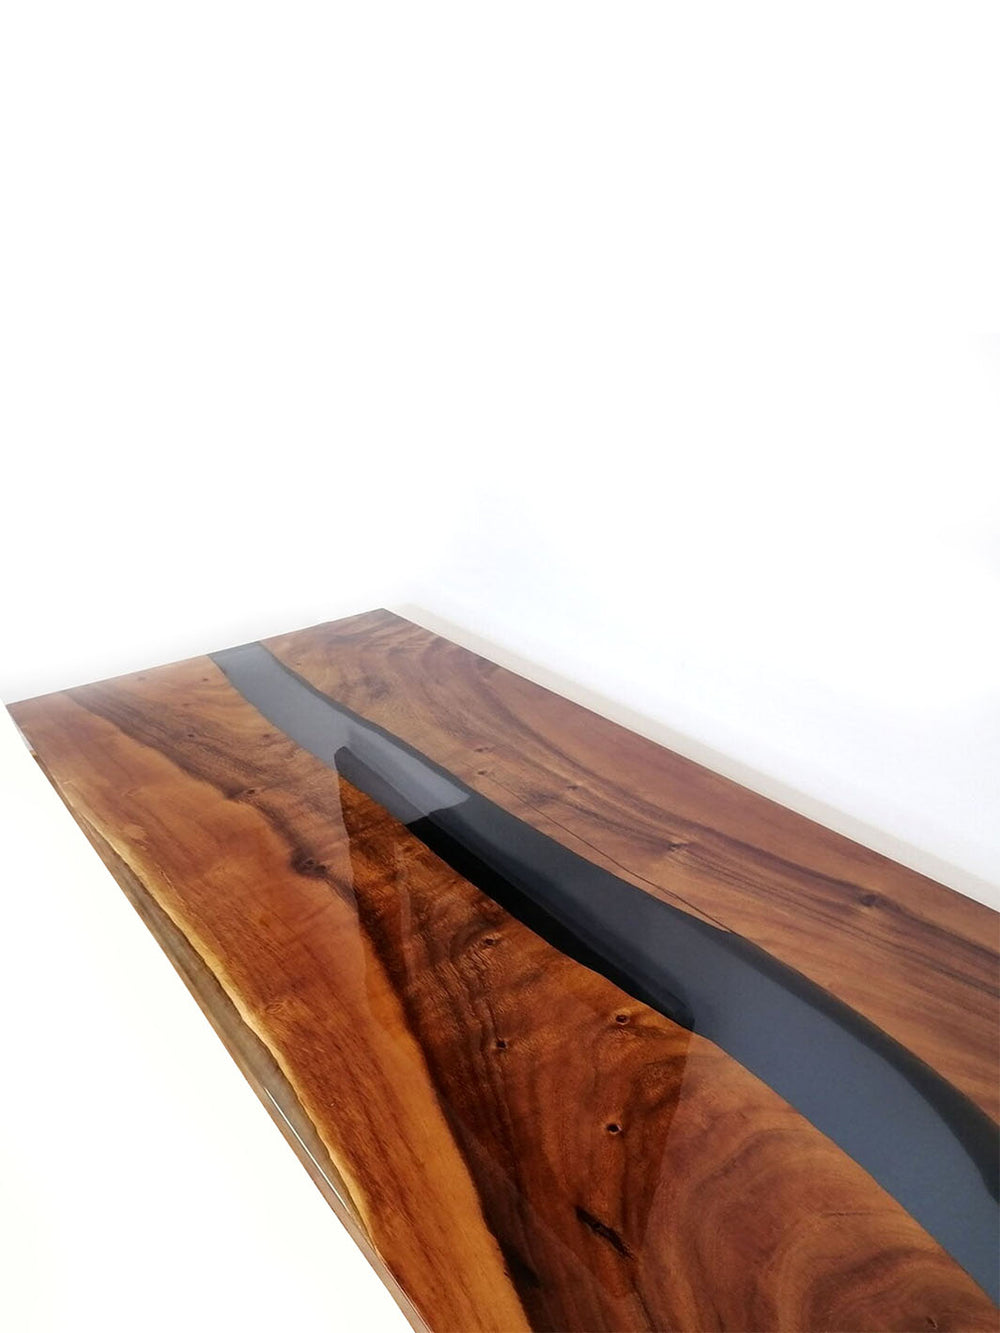 Epoxy Resin Wooden Dining Table | Rosewood Slabs & Resin | 170x70cm Made 4 Decor Tables MDR0004-1